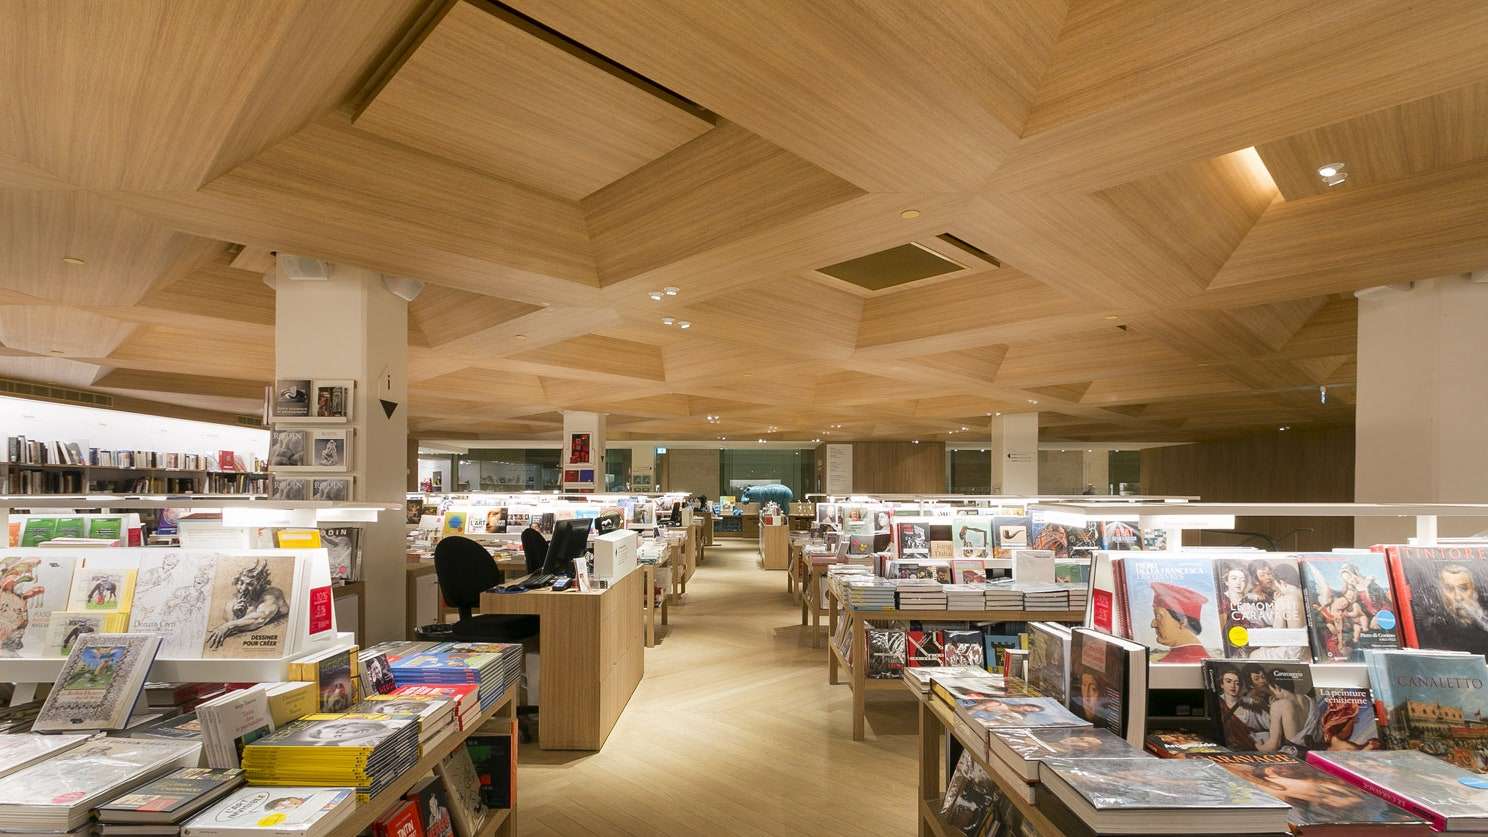 The Louvre opens its bookstore